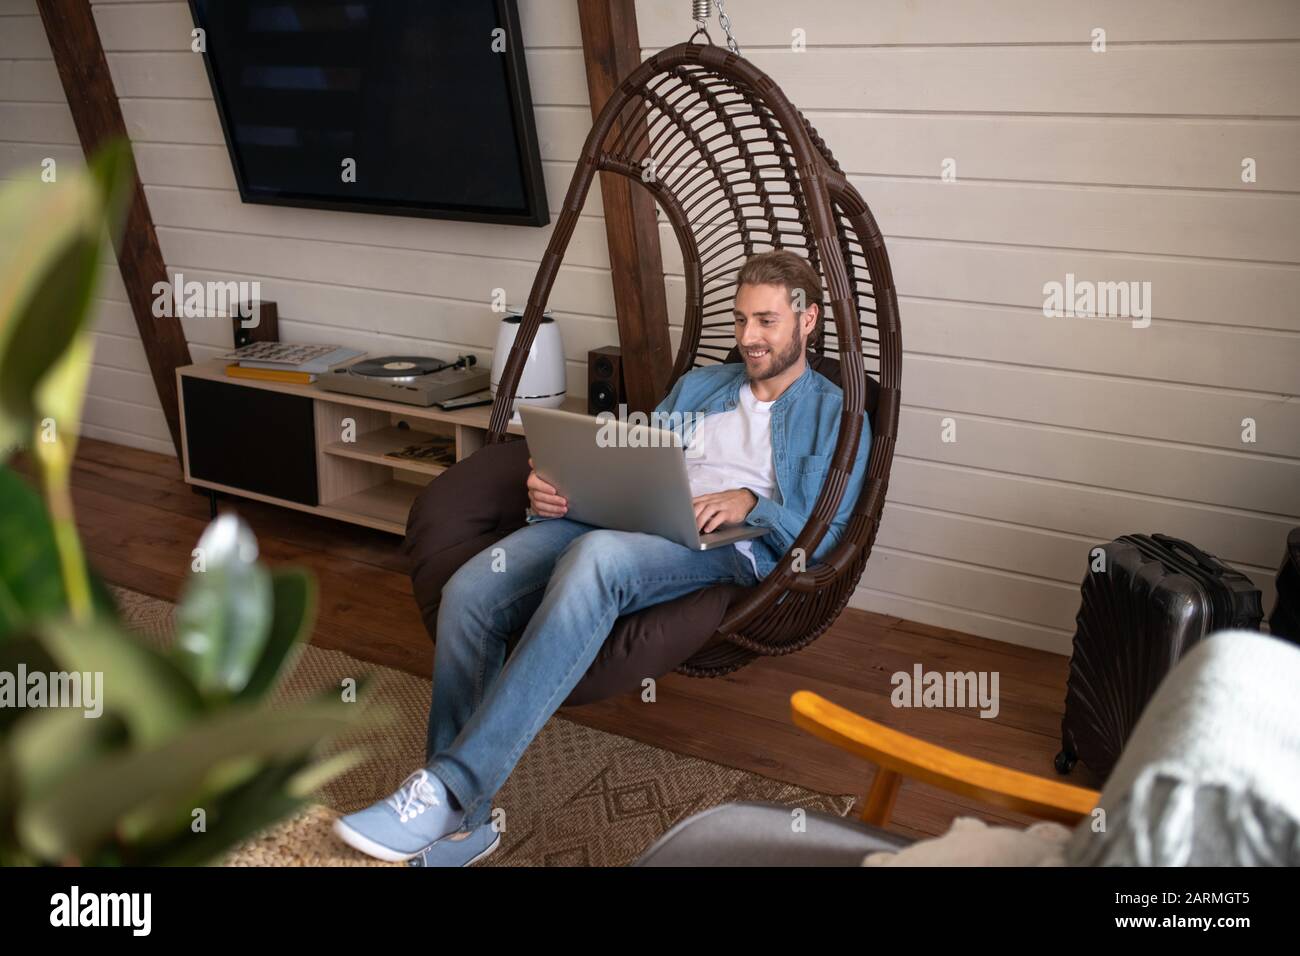 Smiling man sitting in the armchair working with a computer Stock Photo